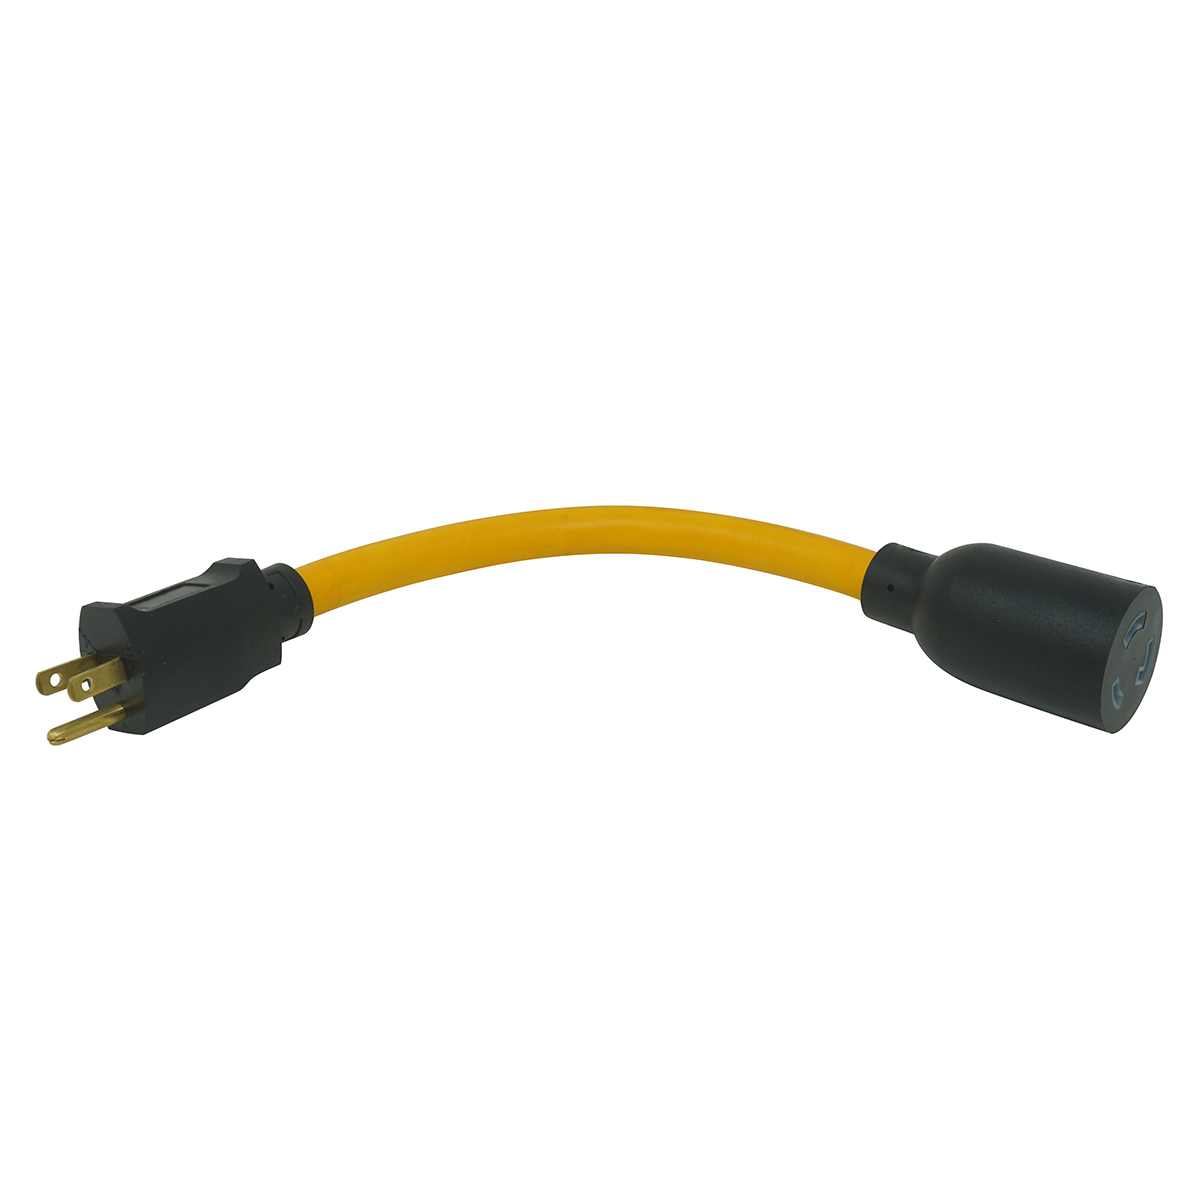 Details about   Southwire 90218802 12/3 STW Yellow 9-inches Twist To Lock L5-20P to 5-15R 